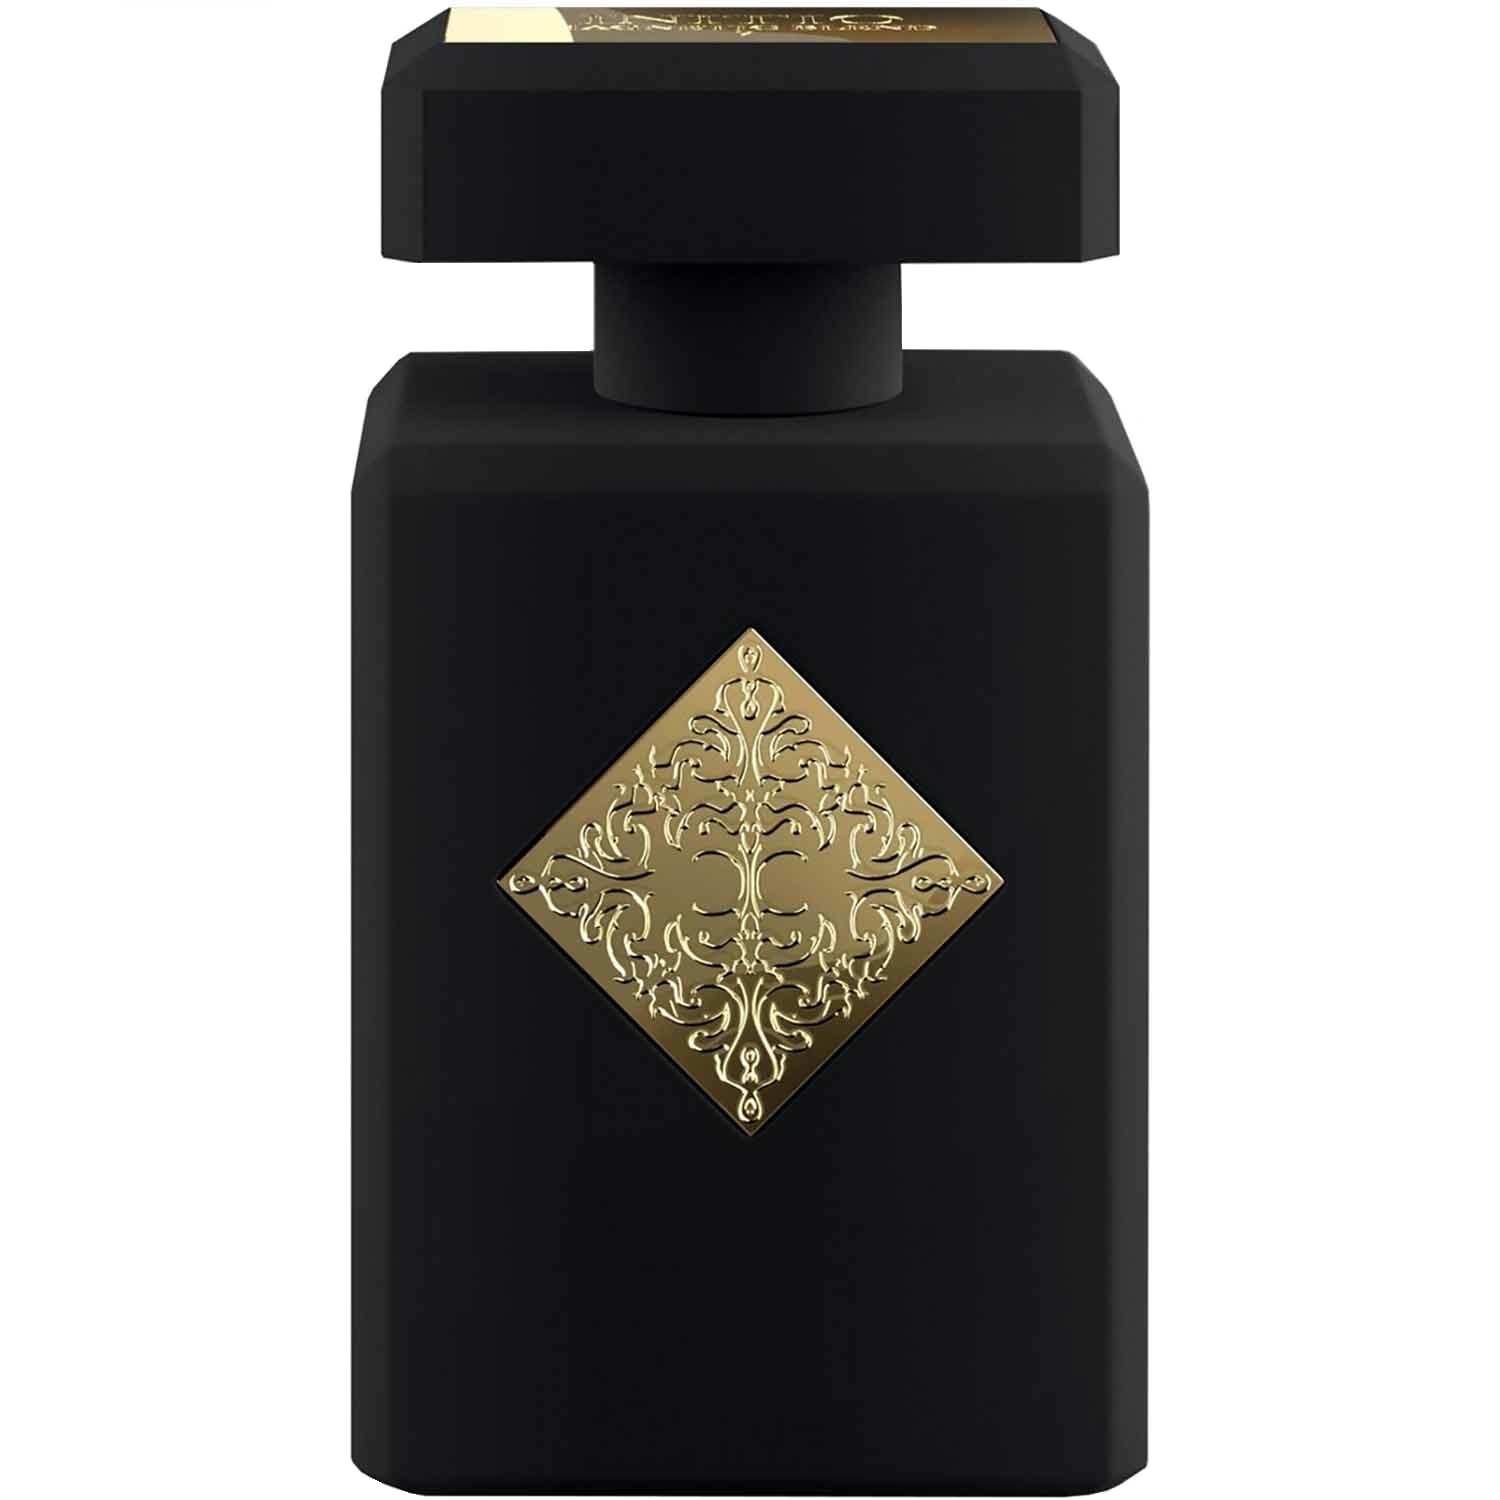 Initio Parfums Prives - Magnetic Blend 8 (2мл)